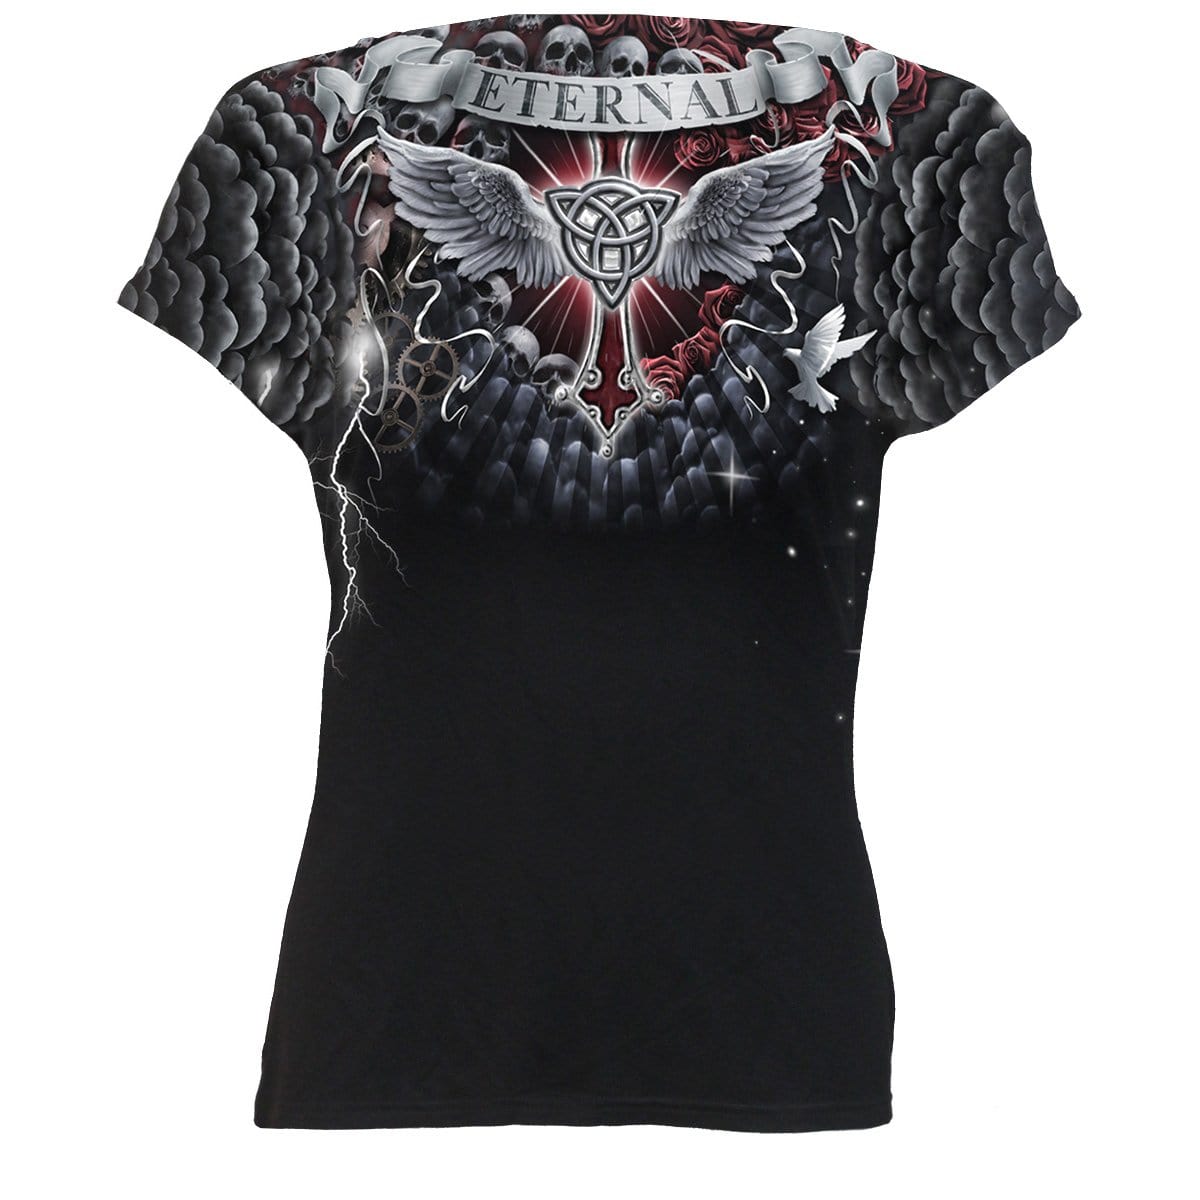 LIFE AND DEATH CROSS - Allover Cap Sleeve Top Black - Spiral USA